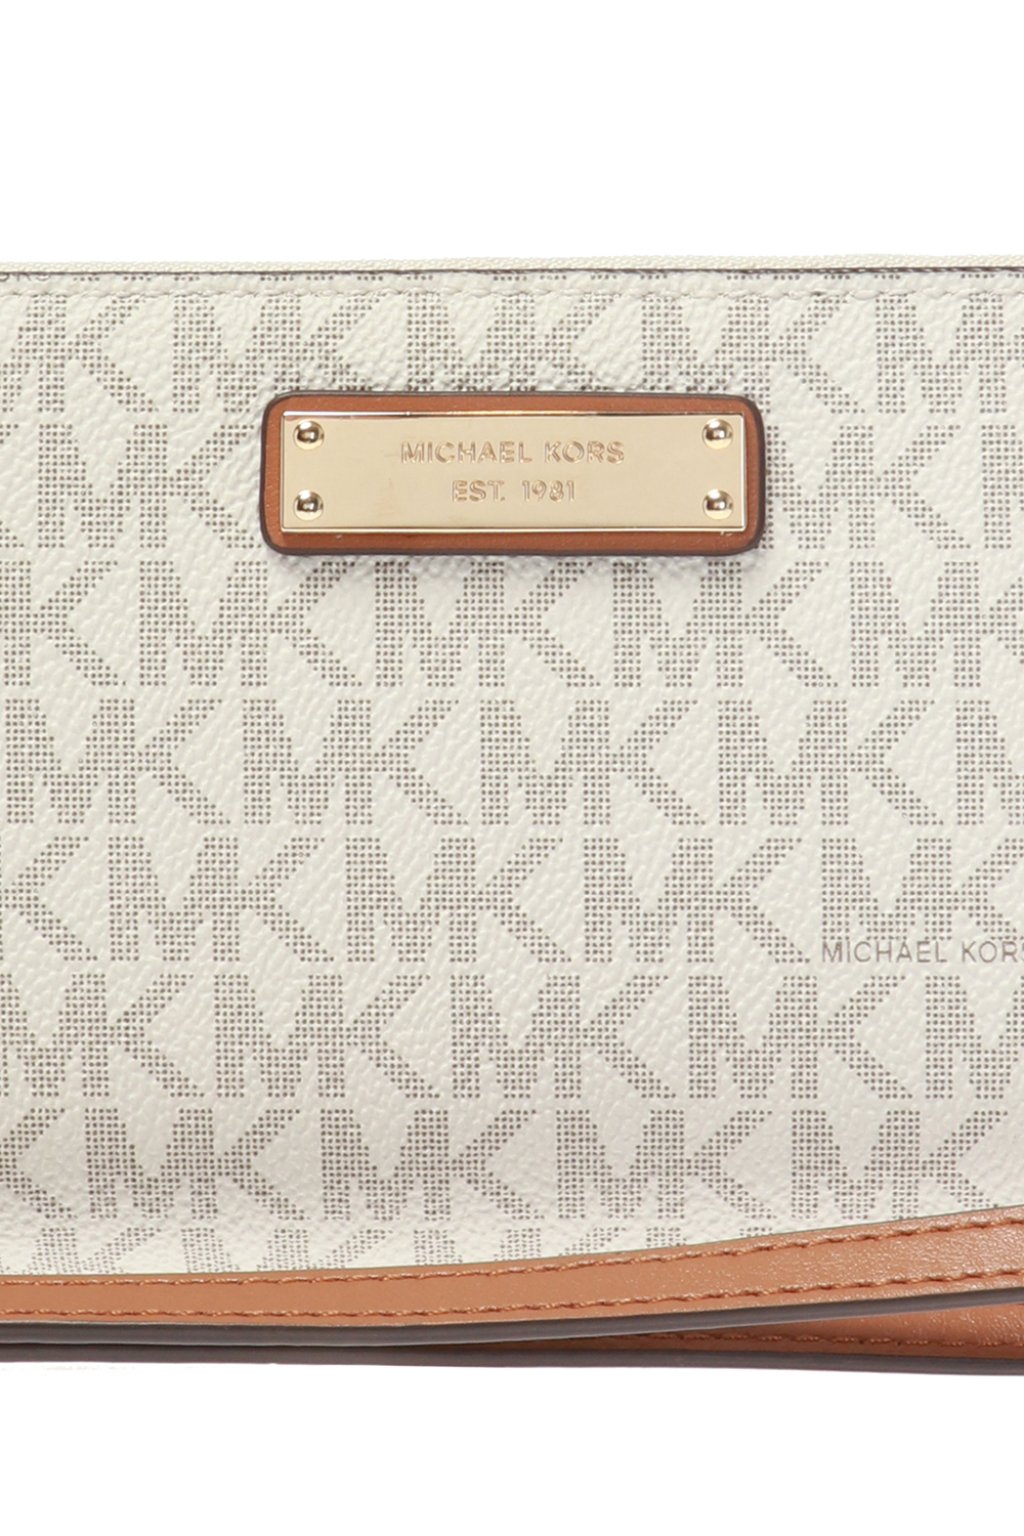 michael kors wallet with strap